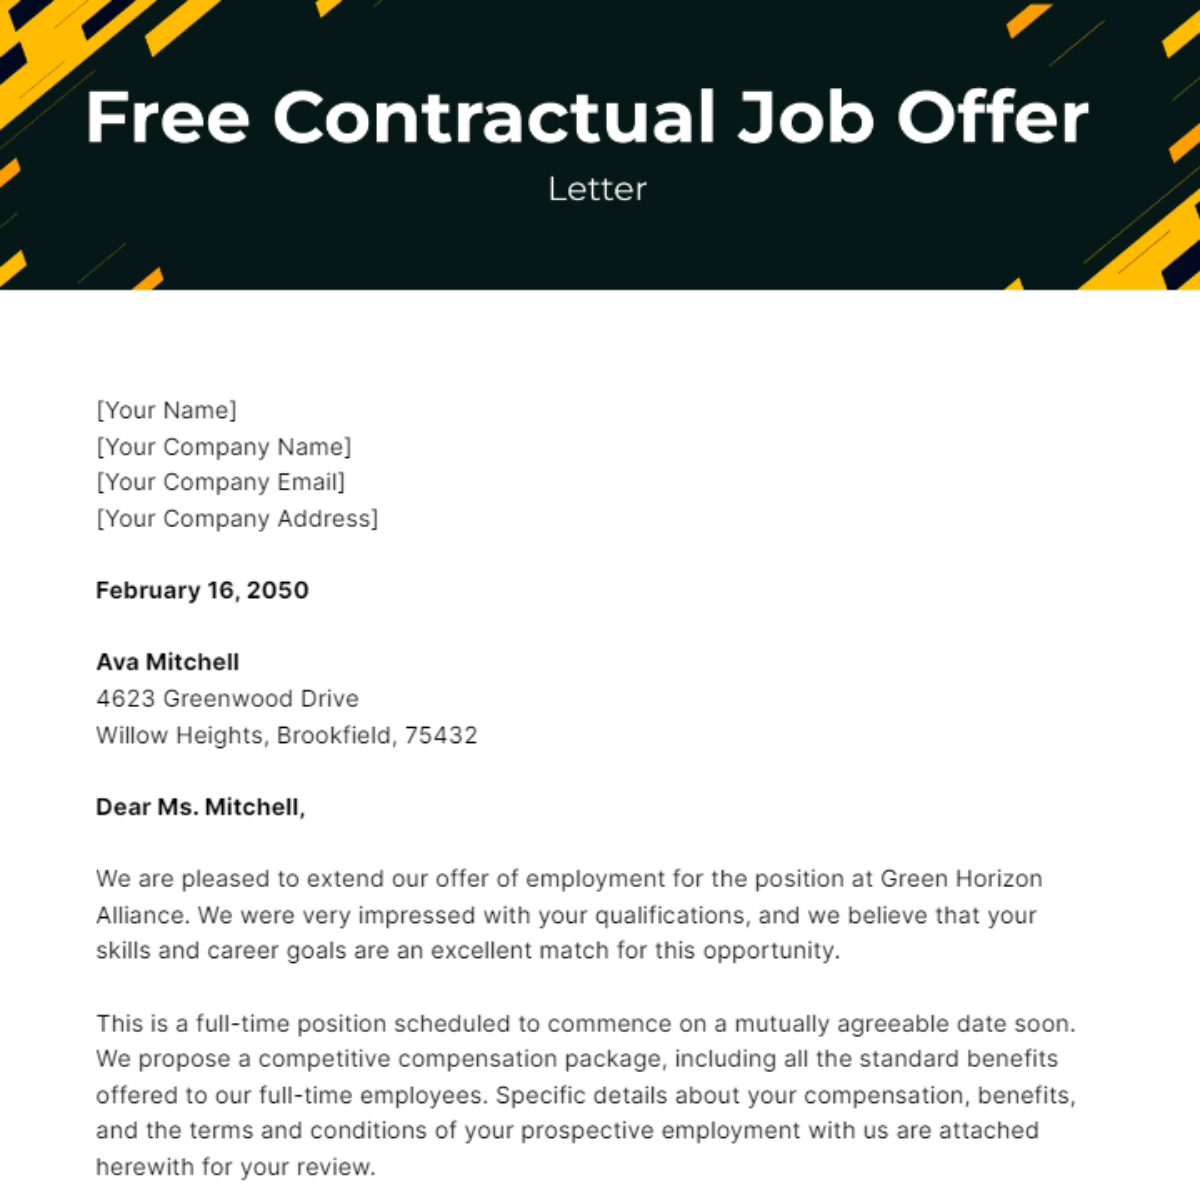 Contractual Job Offer Letter Template